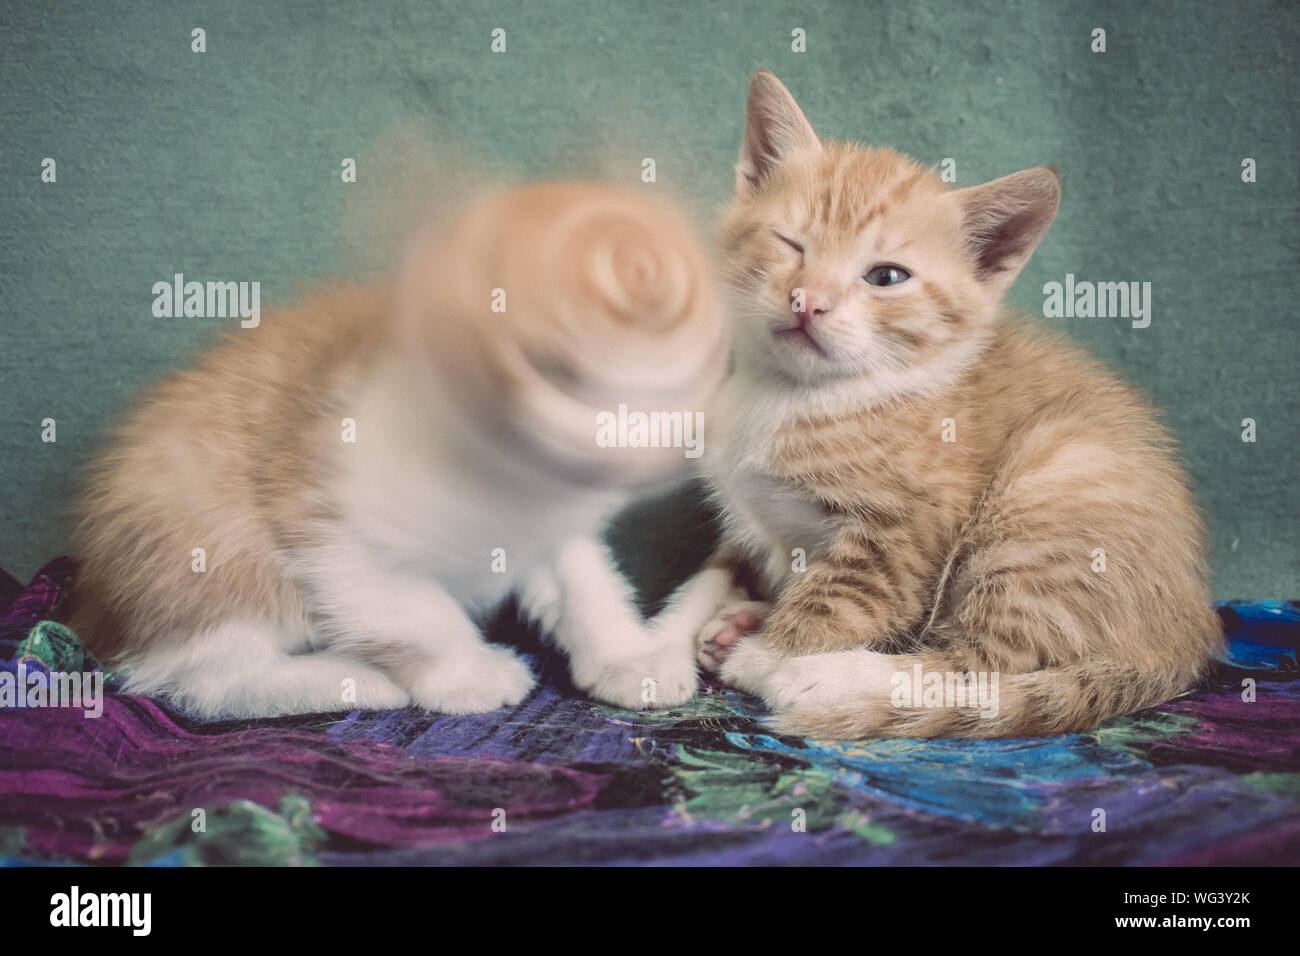 Blurred Motion Cat Shaking Head By Kitten On Bed Stock Photo